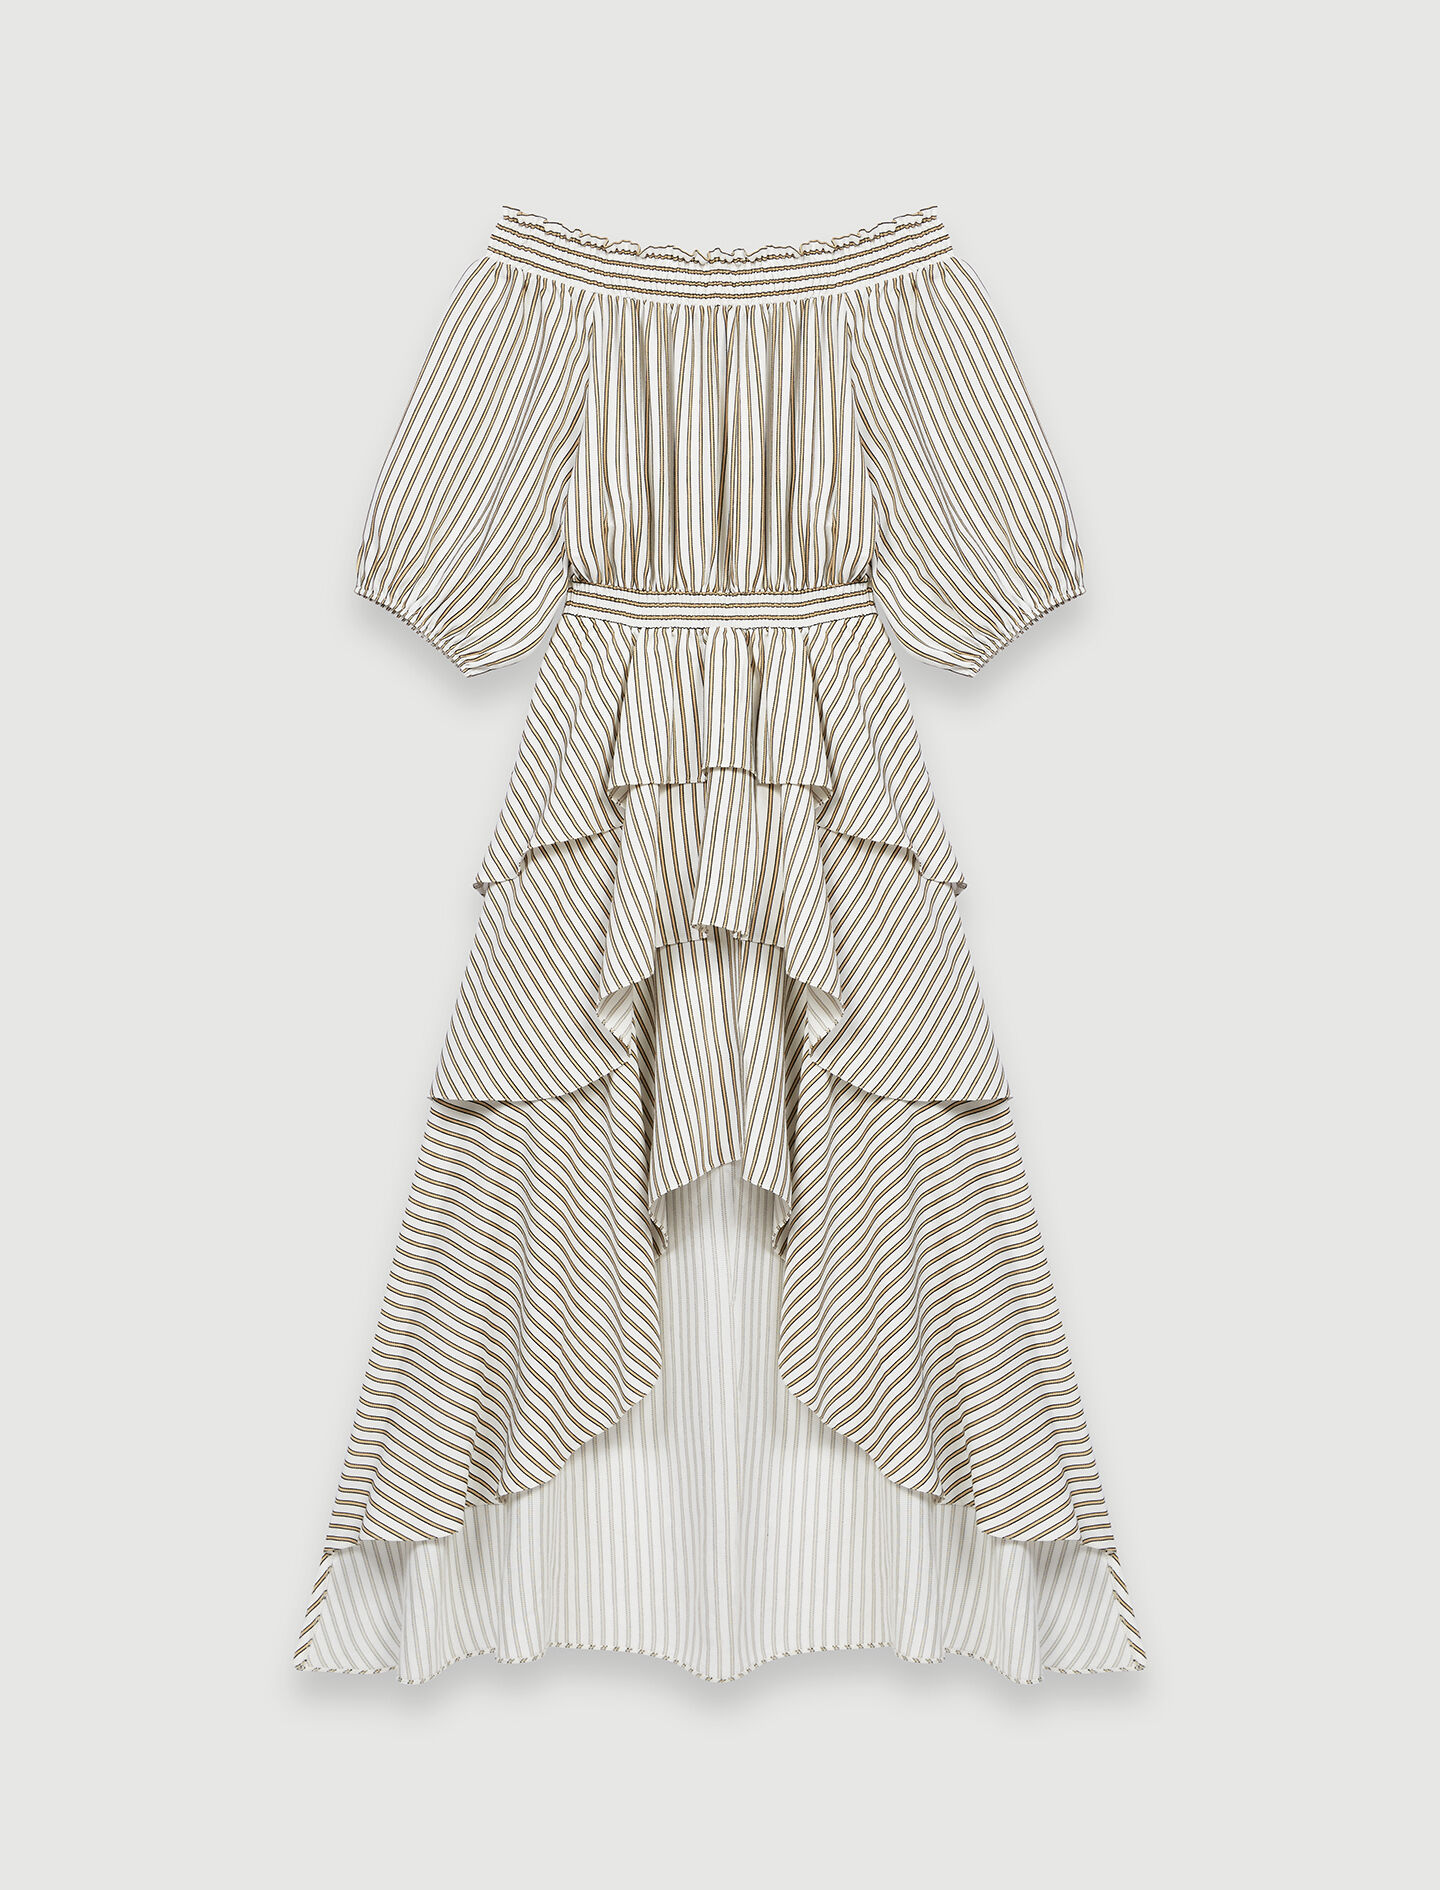 maje STRIPED SMOCKED DRESS WITH RUFFLES | expertplumbinganddrains.com